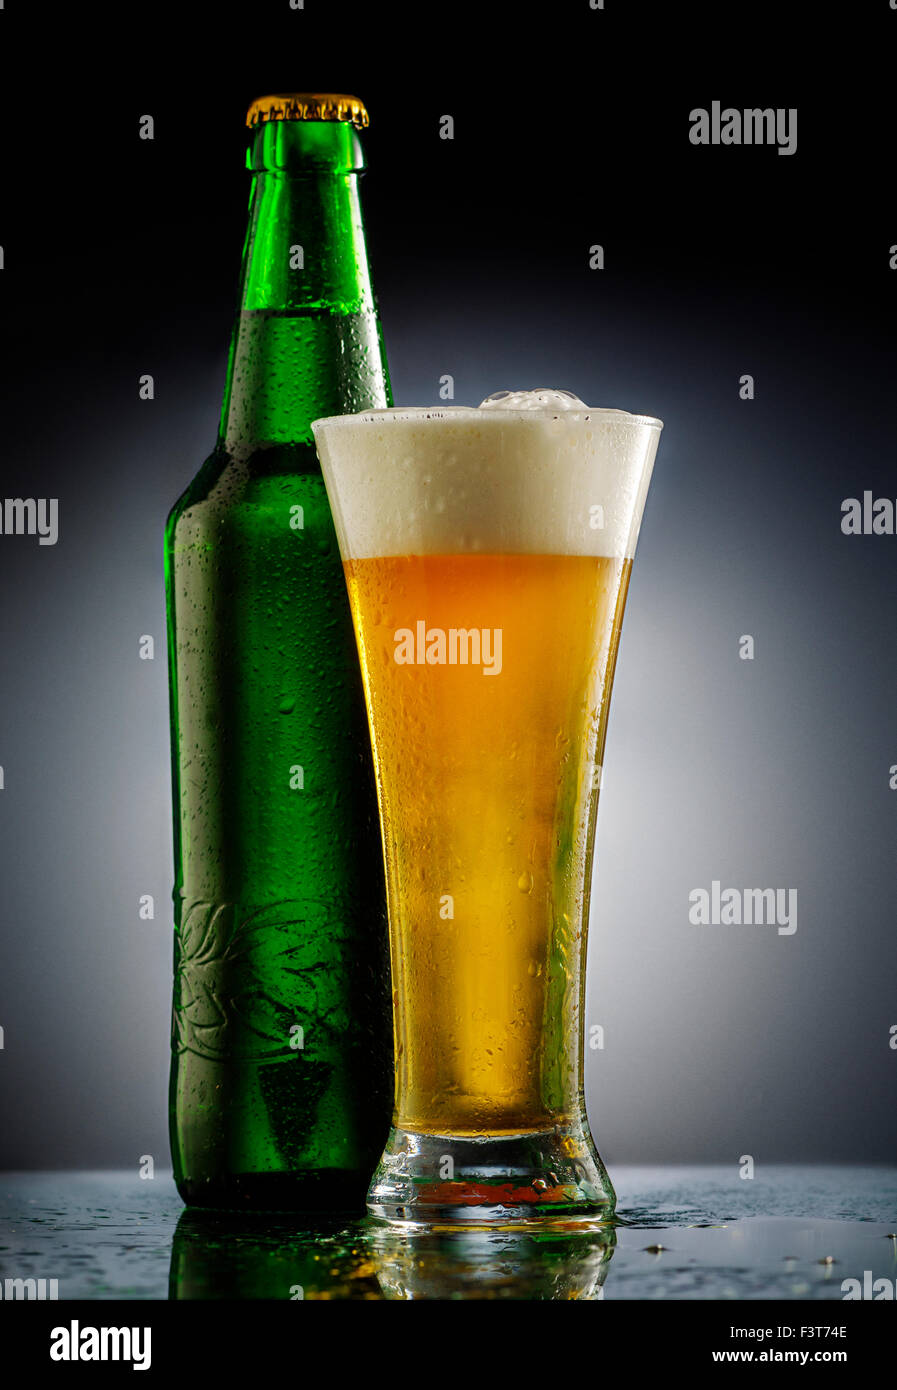 Beer glass in fornt of black background Stock Photo